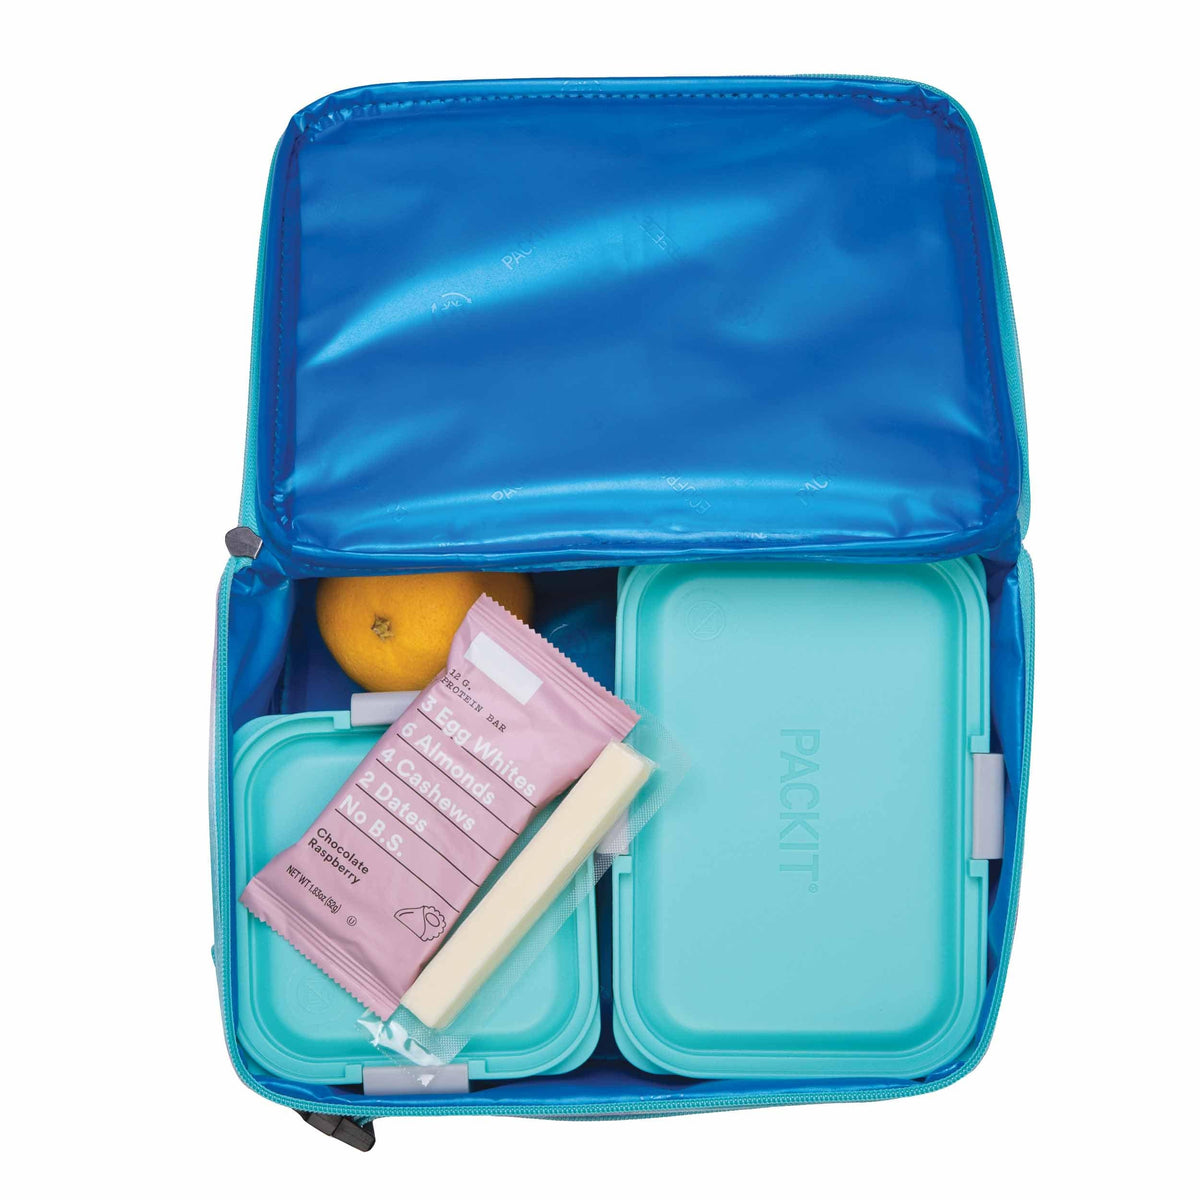 EcoFreeze Lunch Box | Buy a Classic Soft Side Lunch Box Online - PackIt